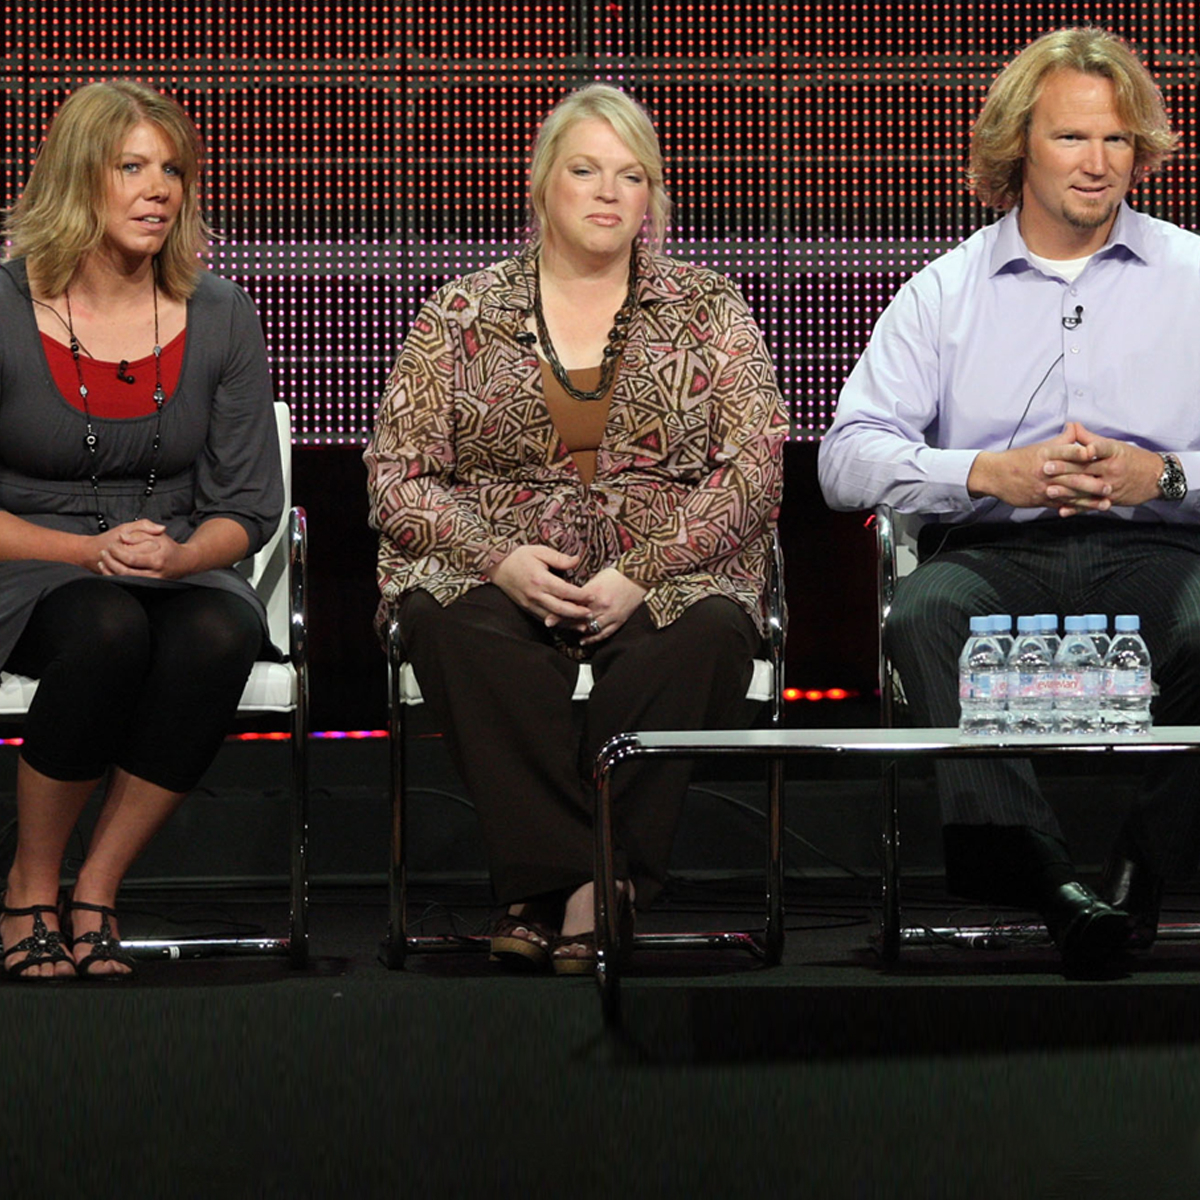 Sister Wives' Fans Notice Kody Brown Missing From Janelle's Holiday Photos